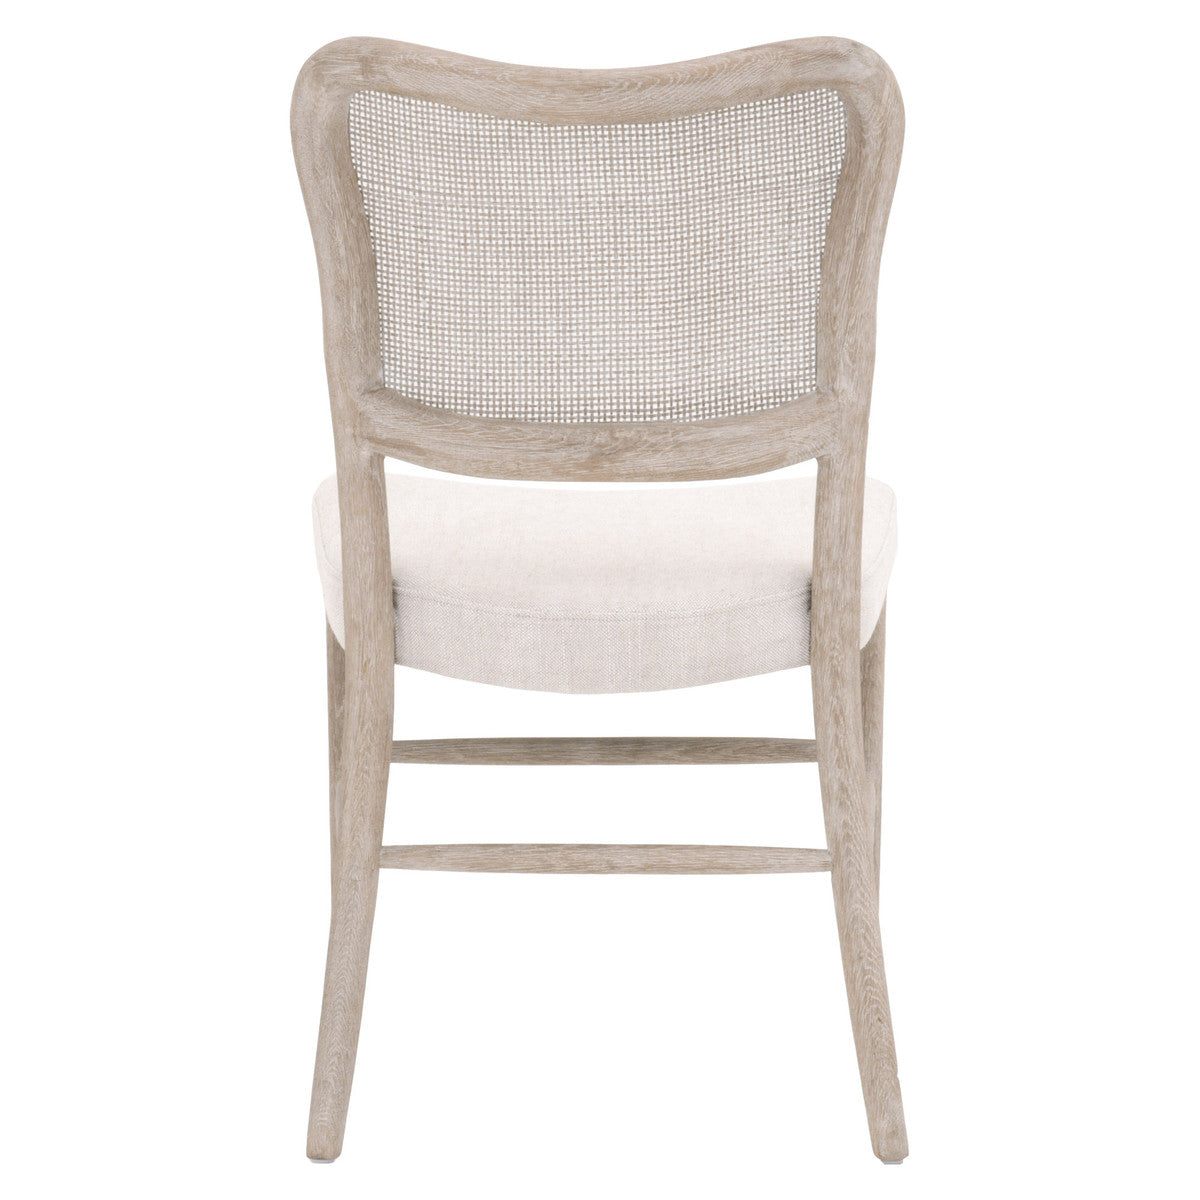 Celine Dining Chair - Set of (2)